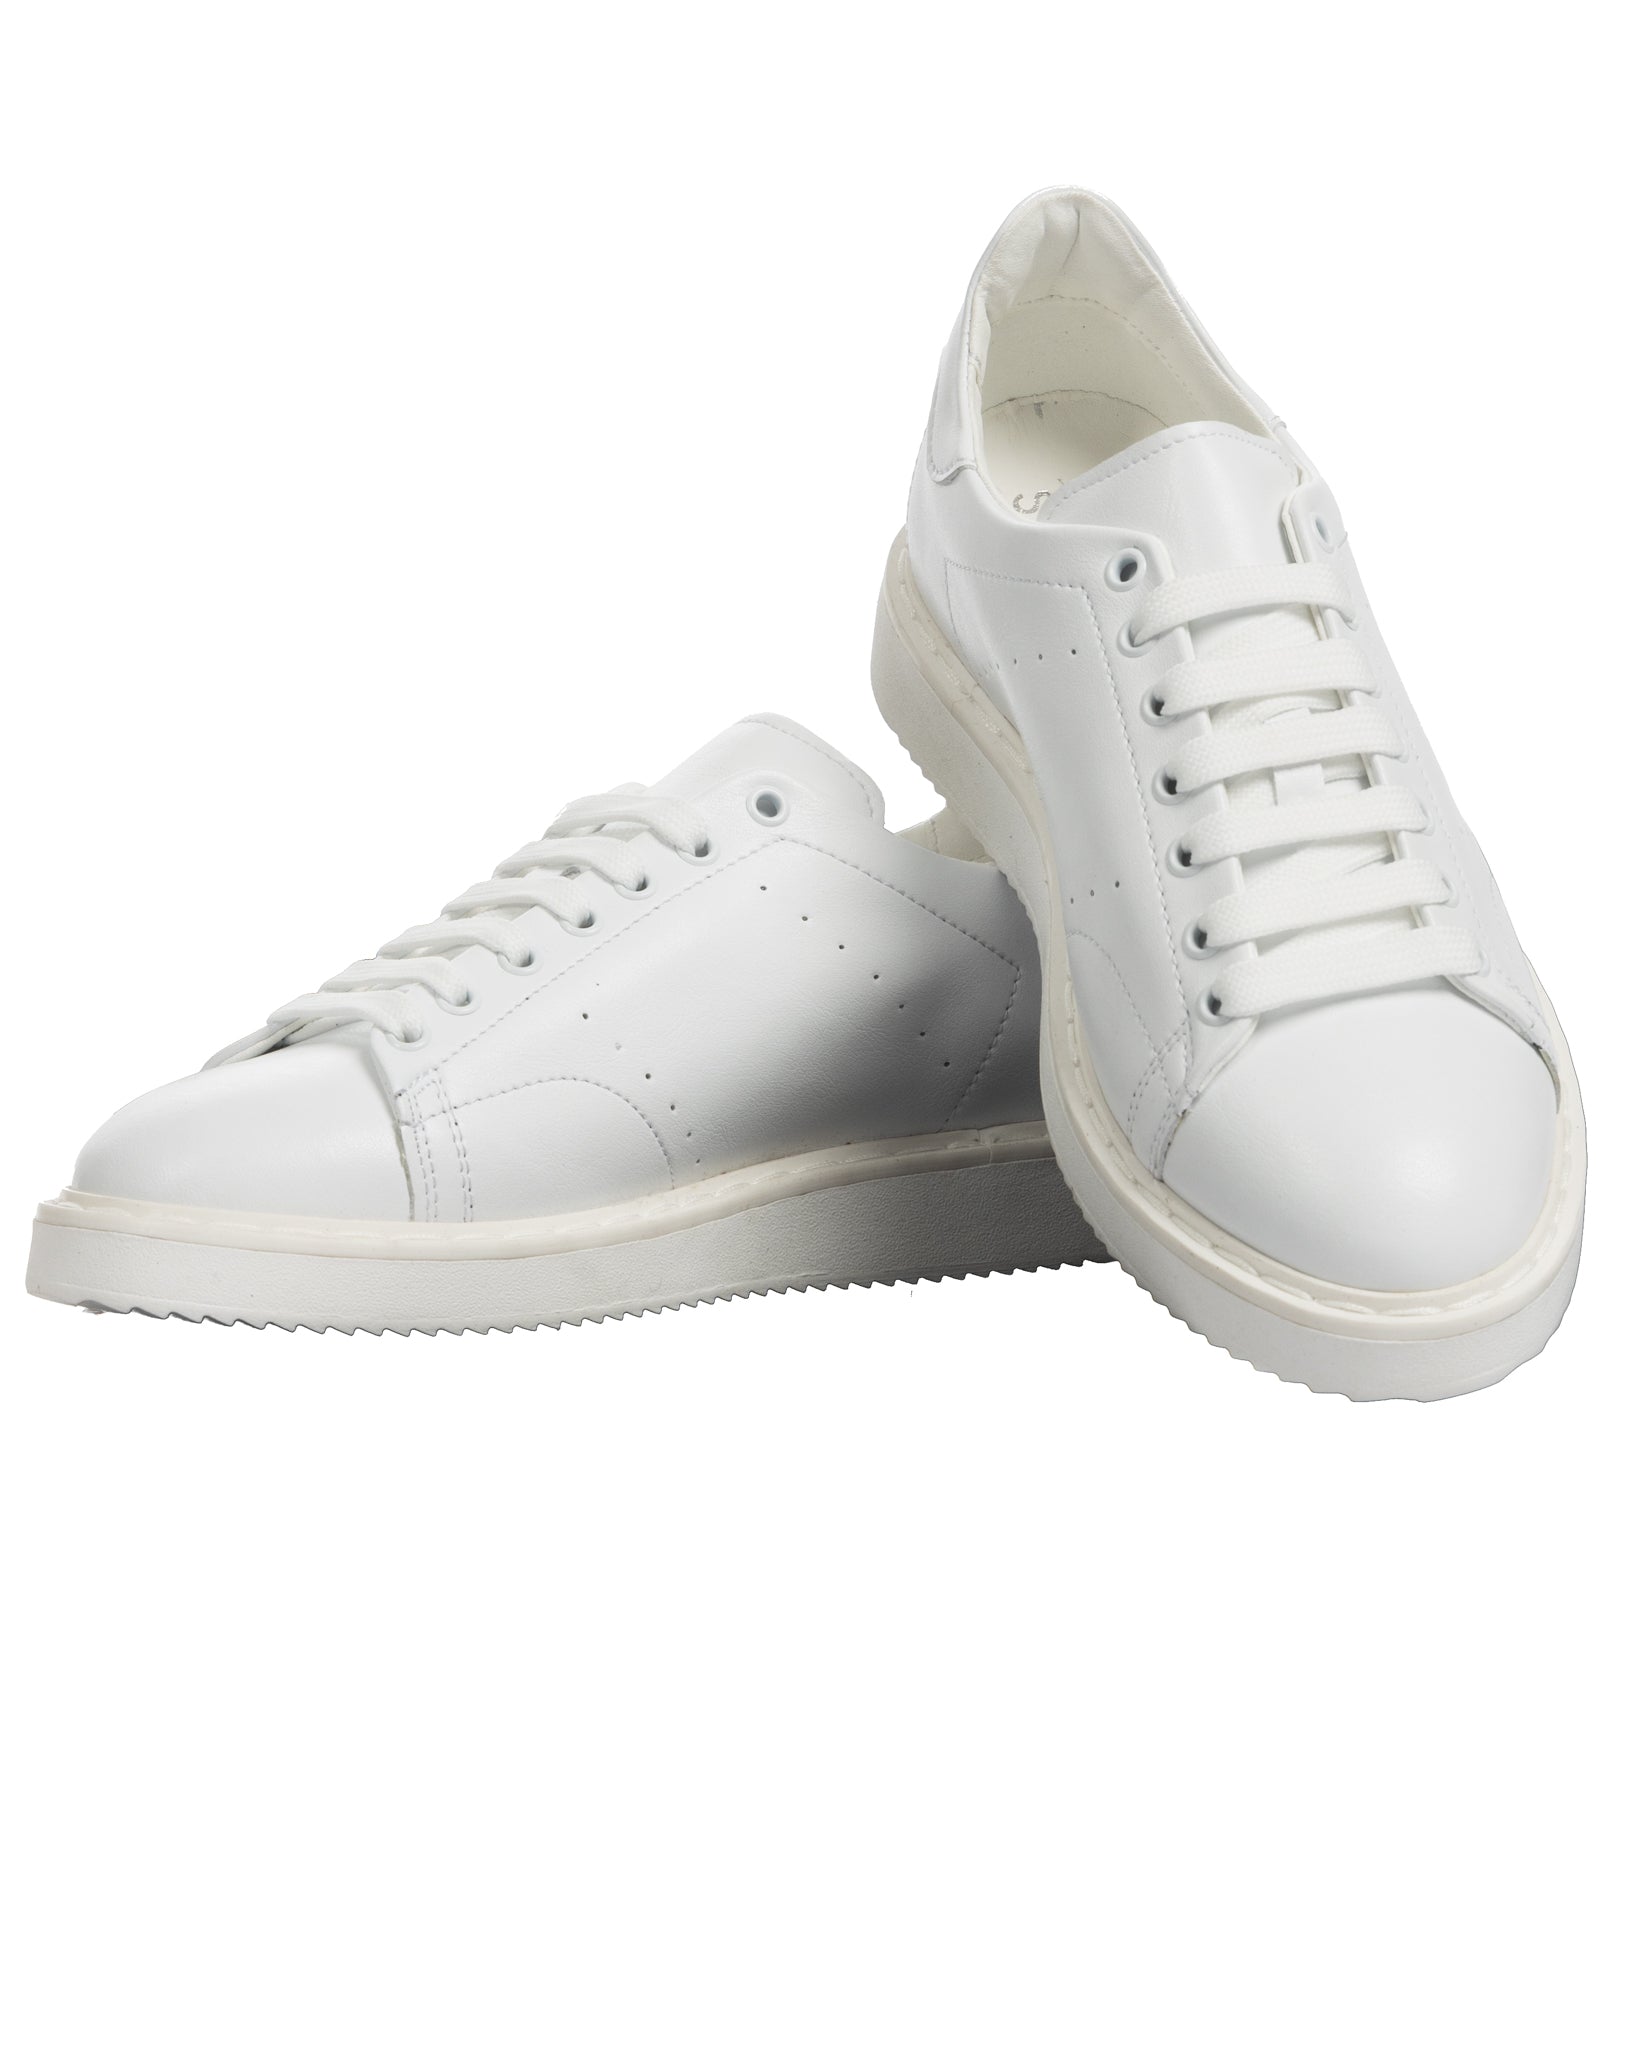 S01 - white leather sneakers